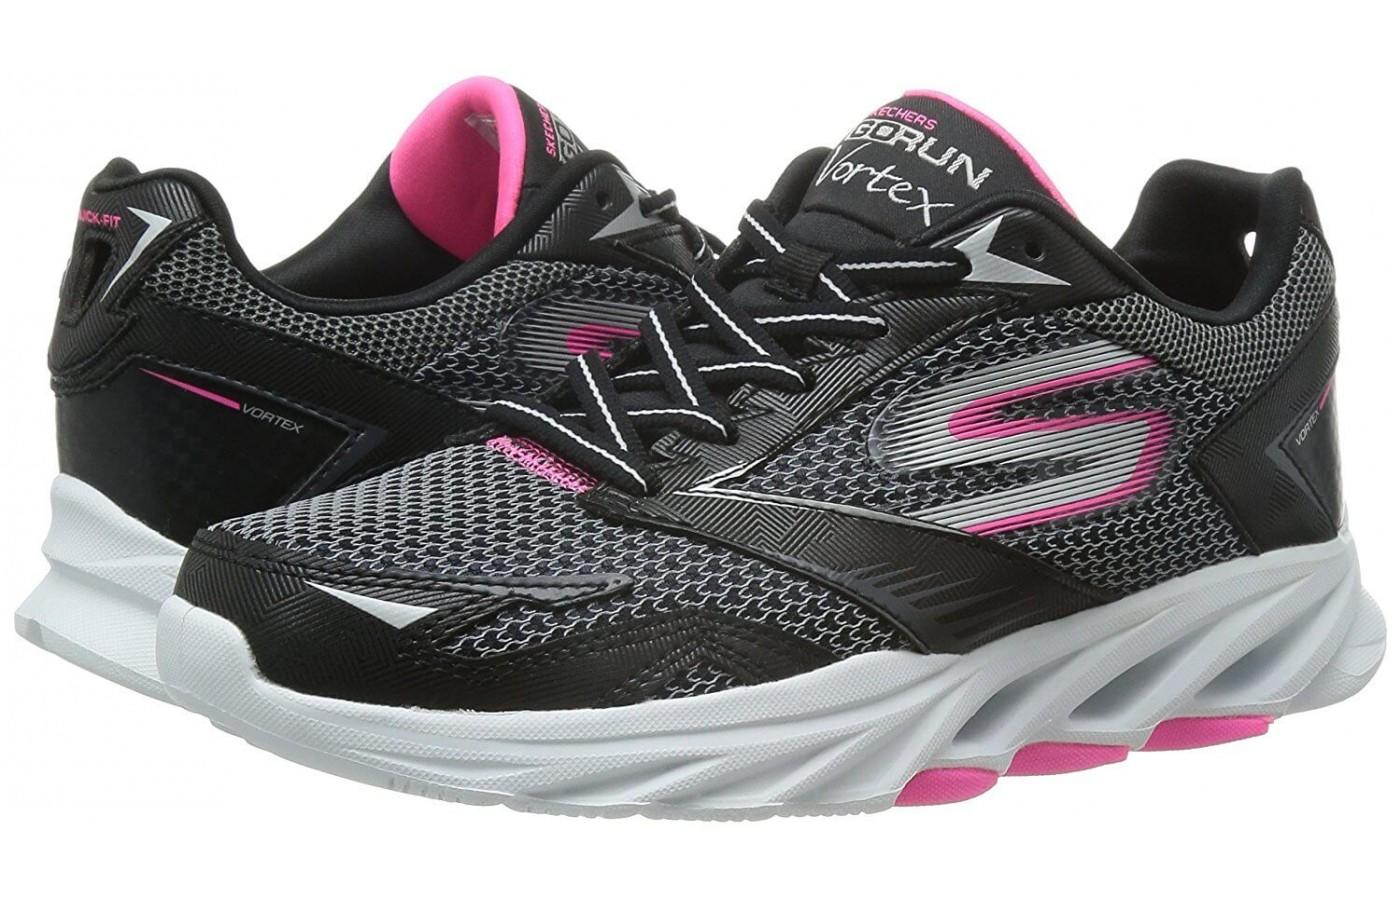 Pair of Skechers GoRun Vortex in black with pink and white accents